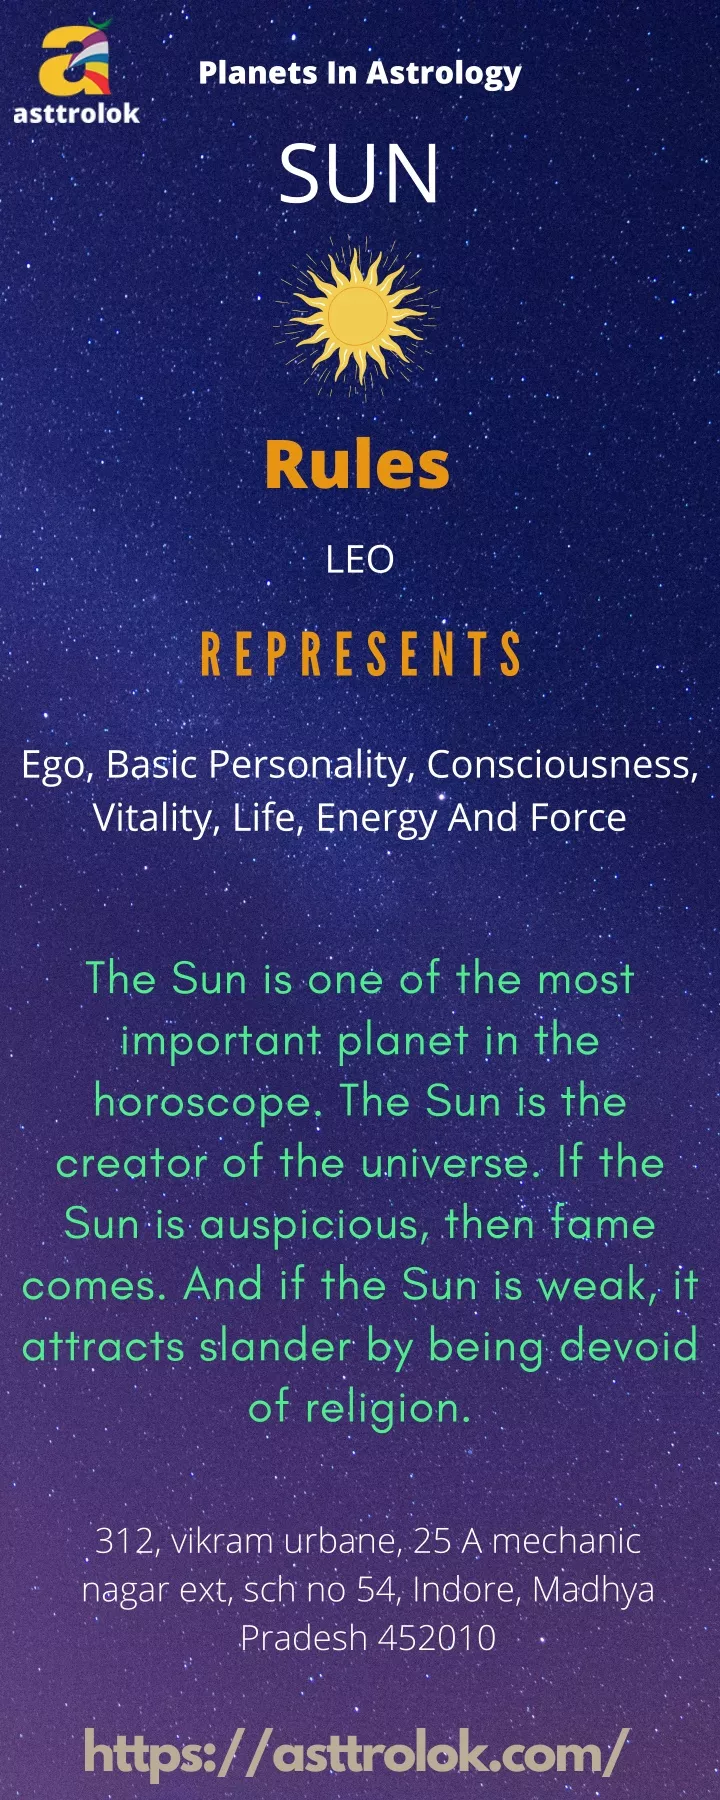 planets in astrology sun